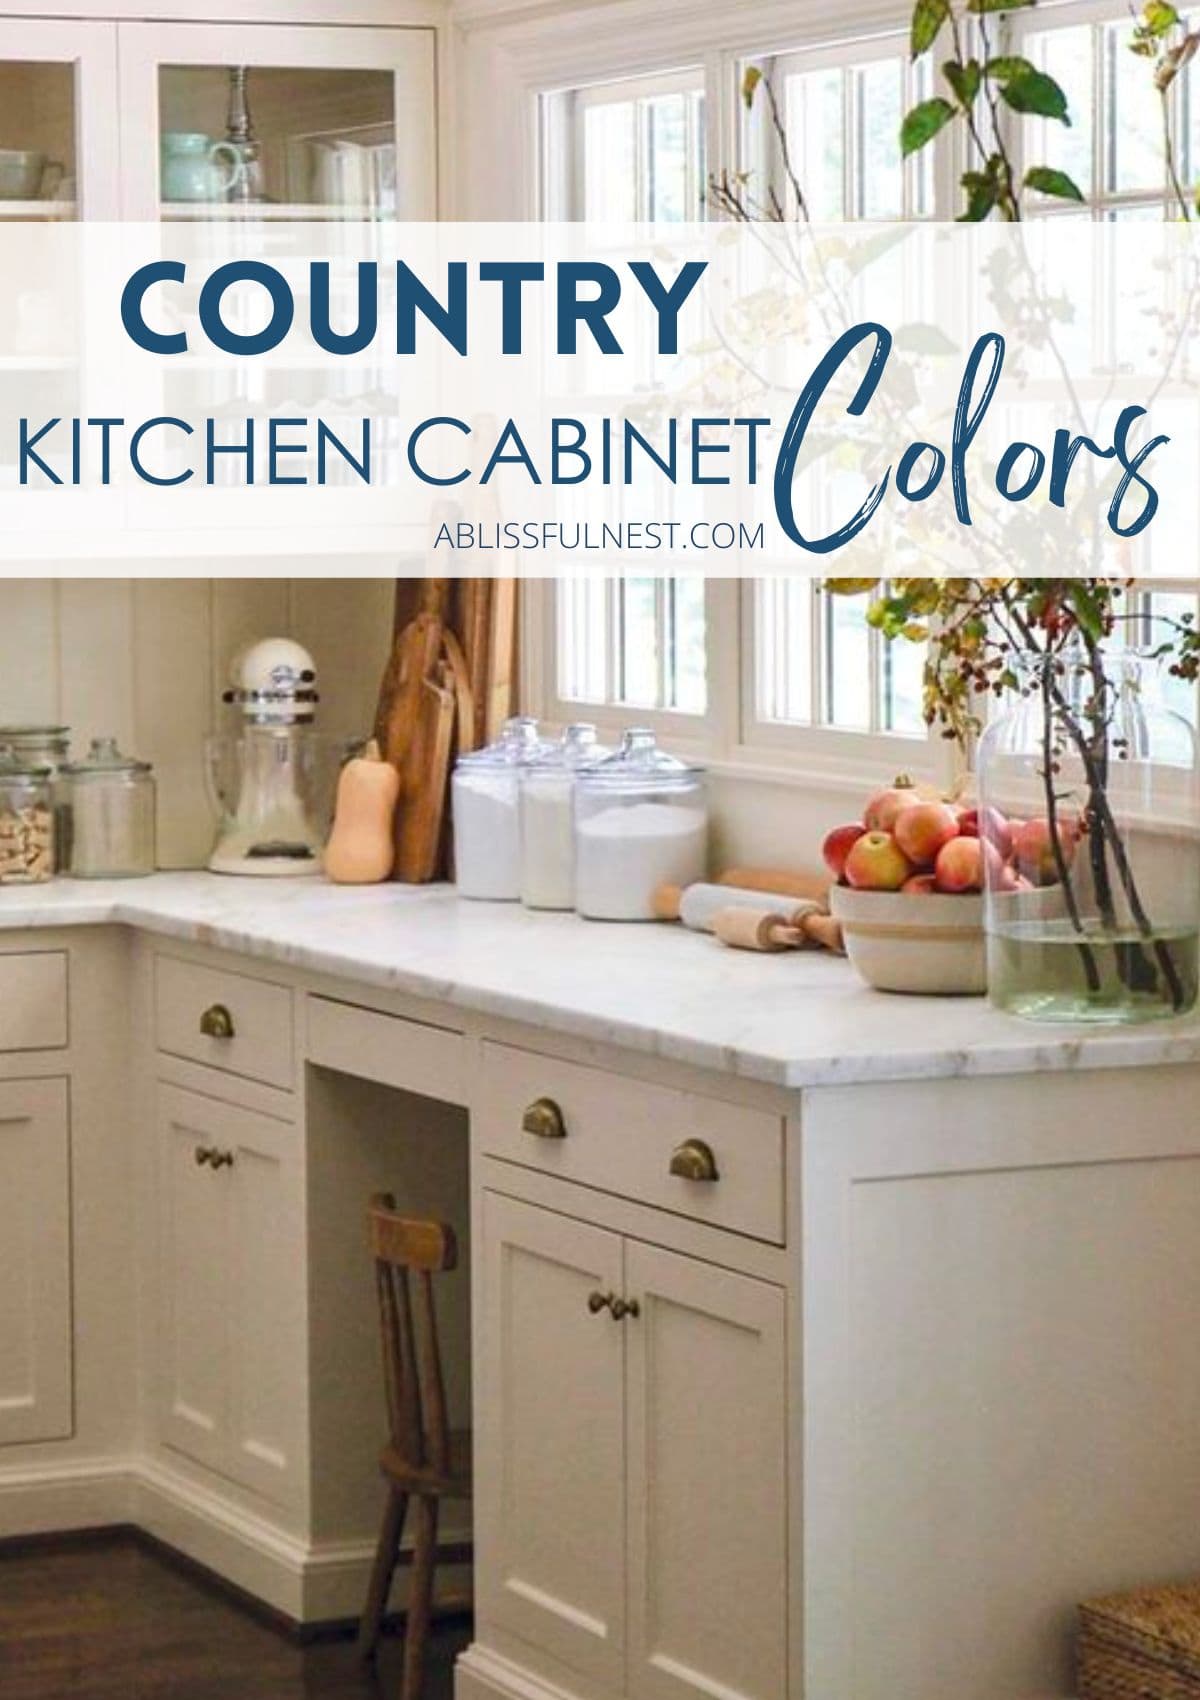 cream colored kitchen cabinets with gold cabinet hardware, wood flooring, and marble countertops